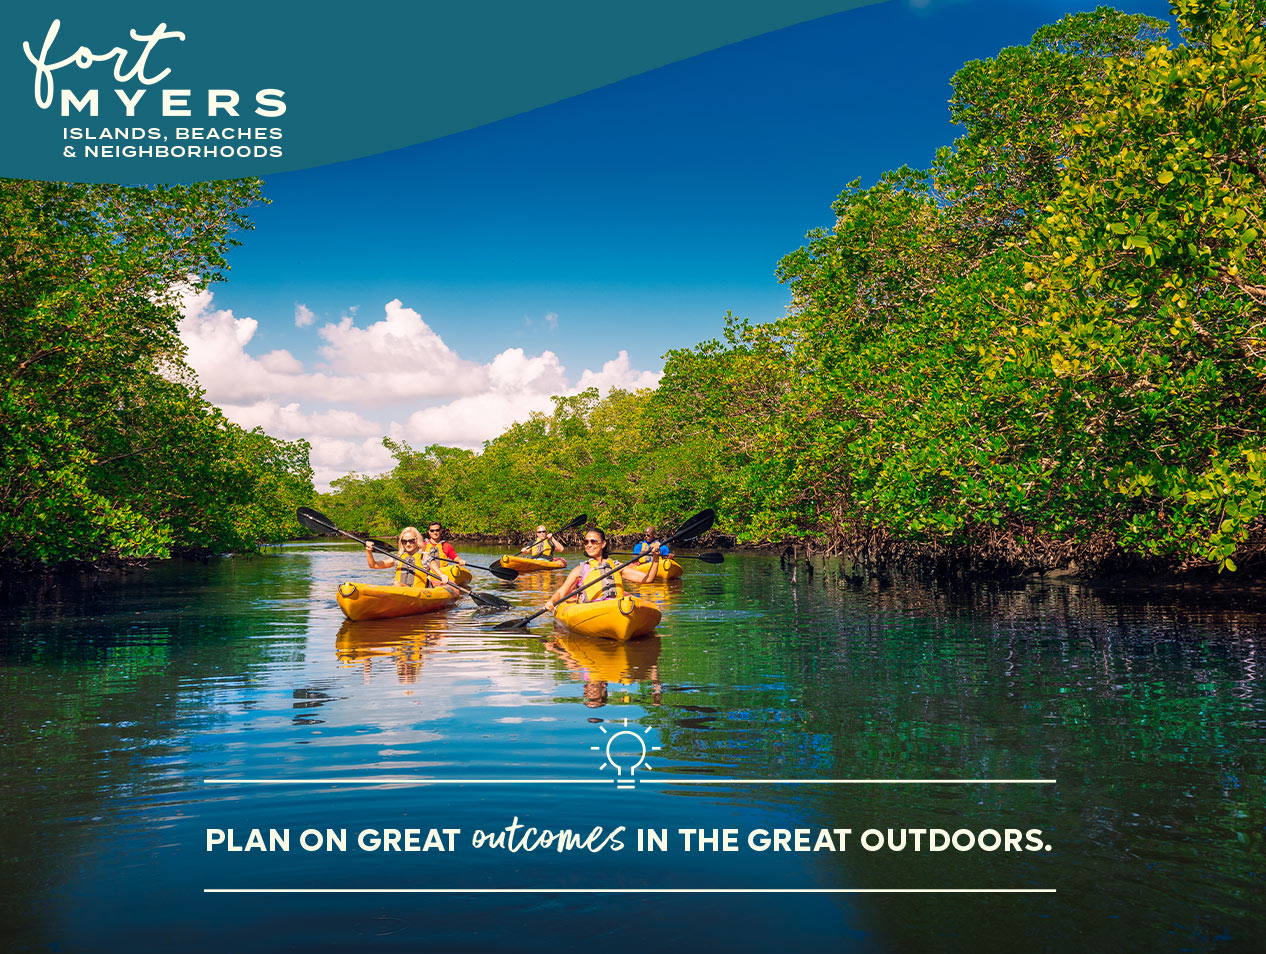 Fort Myers Islands, Beaches & Neighborhoods - Plan on great outcomes in the great outdoors.